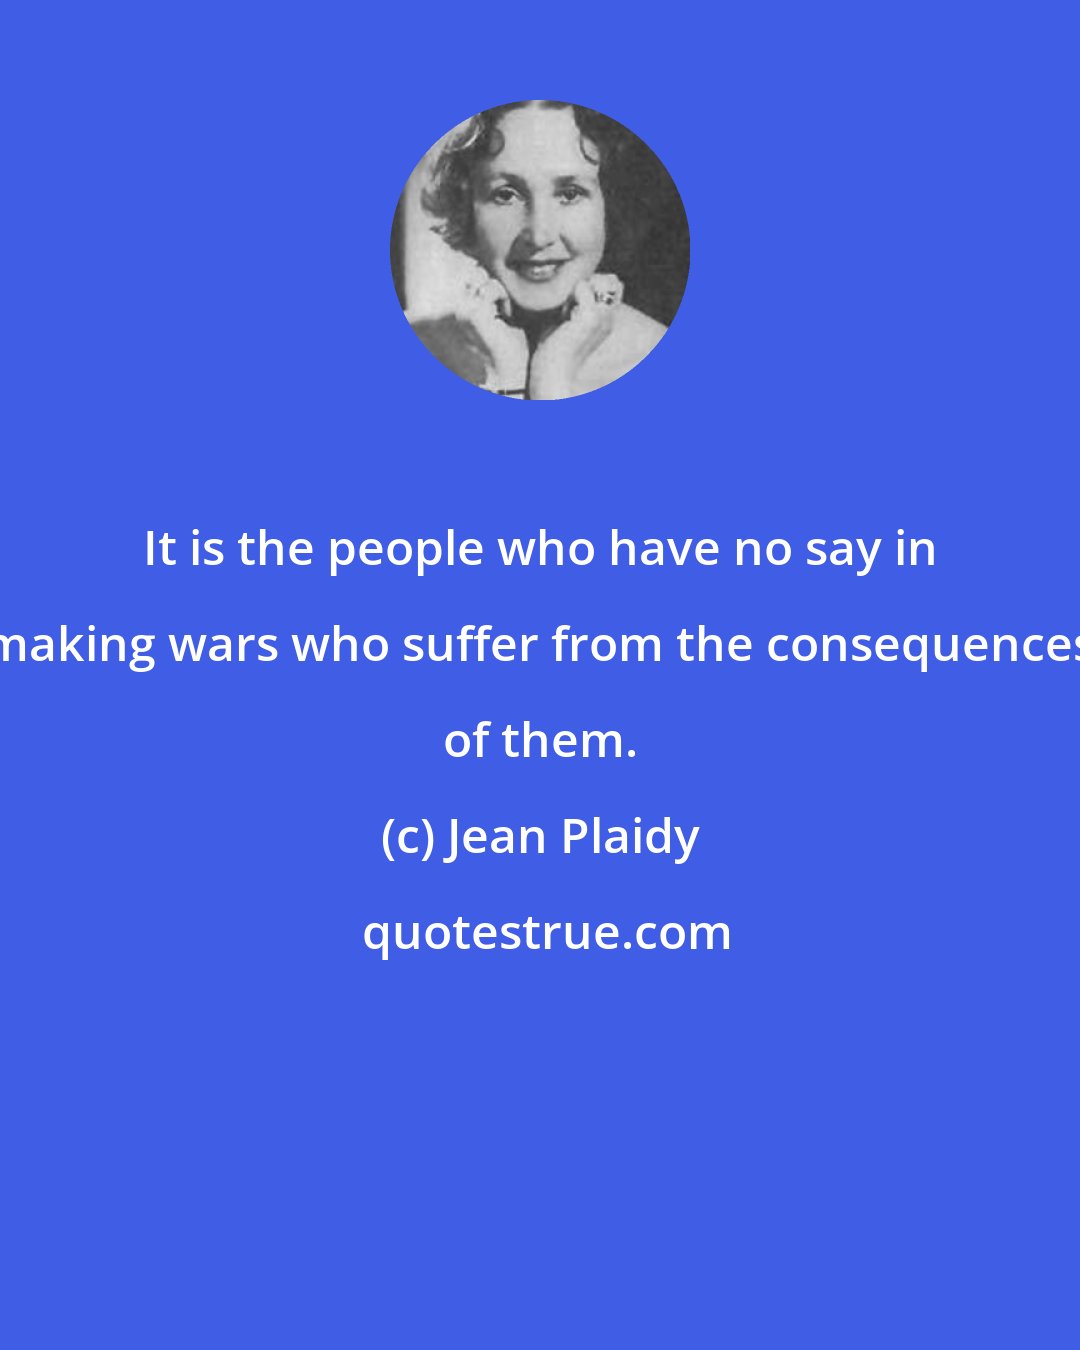 Jean Plaidy: It is the people who have no say in making wars who suffer from the consequences of them.